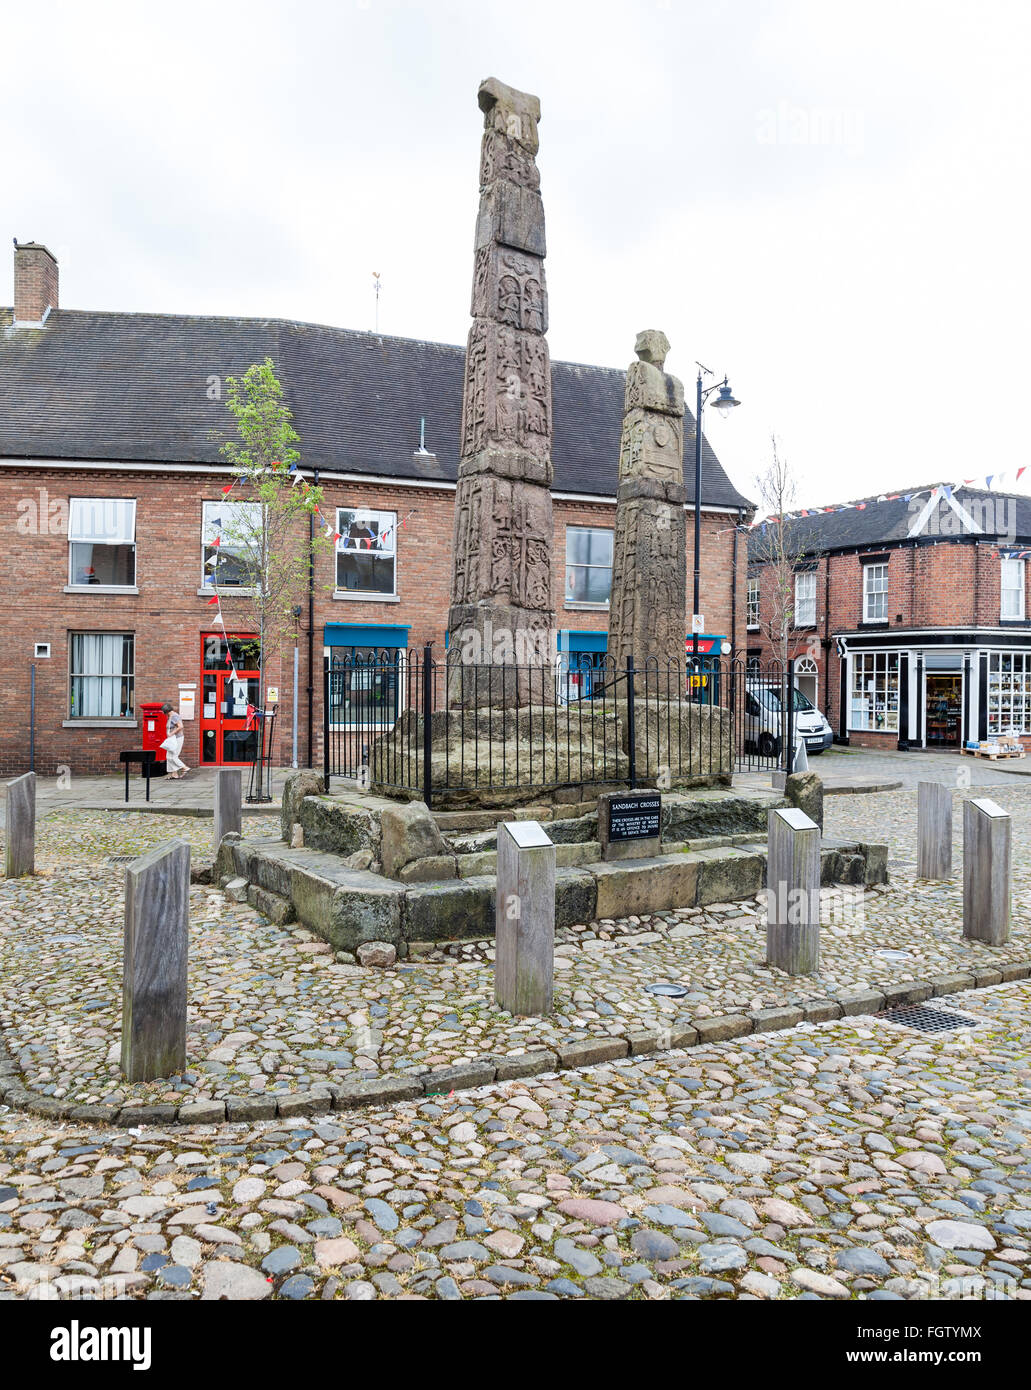 The Sandbach Crosses are two 9th-century stone Anglo-Saxon crosses in the market place Sandbach Cheshire England UK Stock Photo